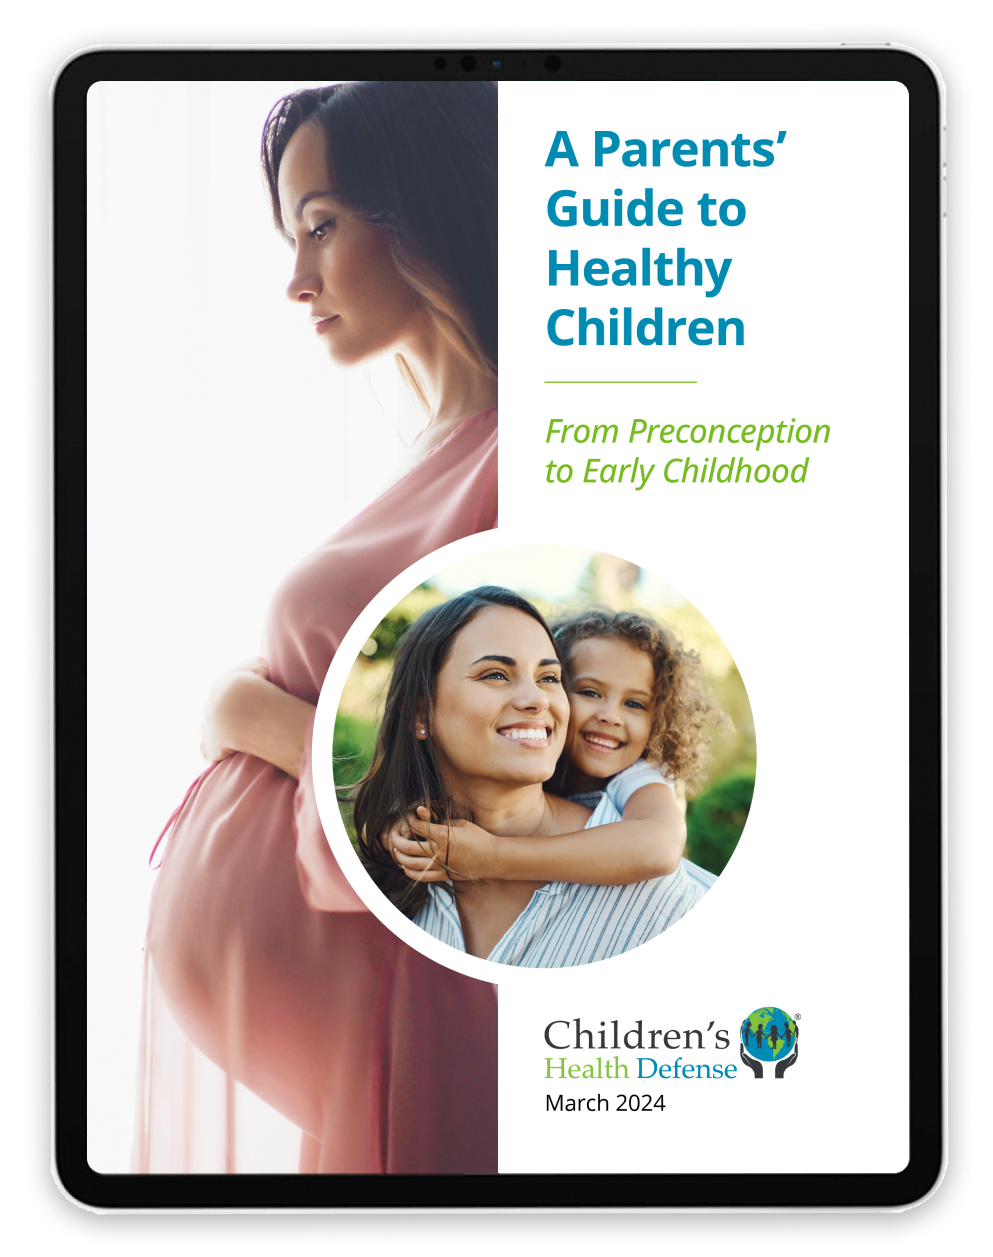 A Parents' Guide to Healthy Children